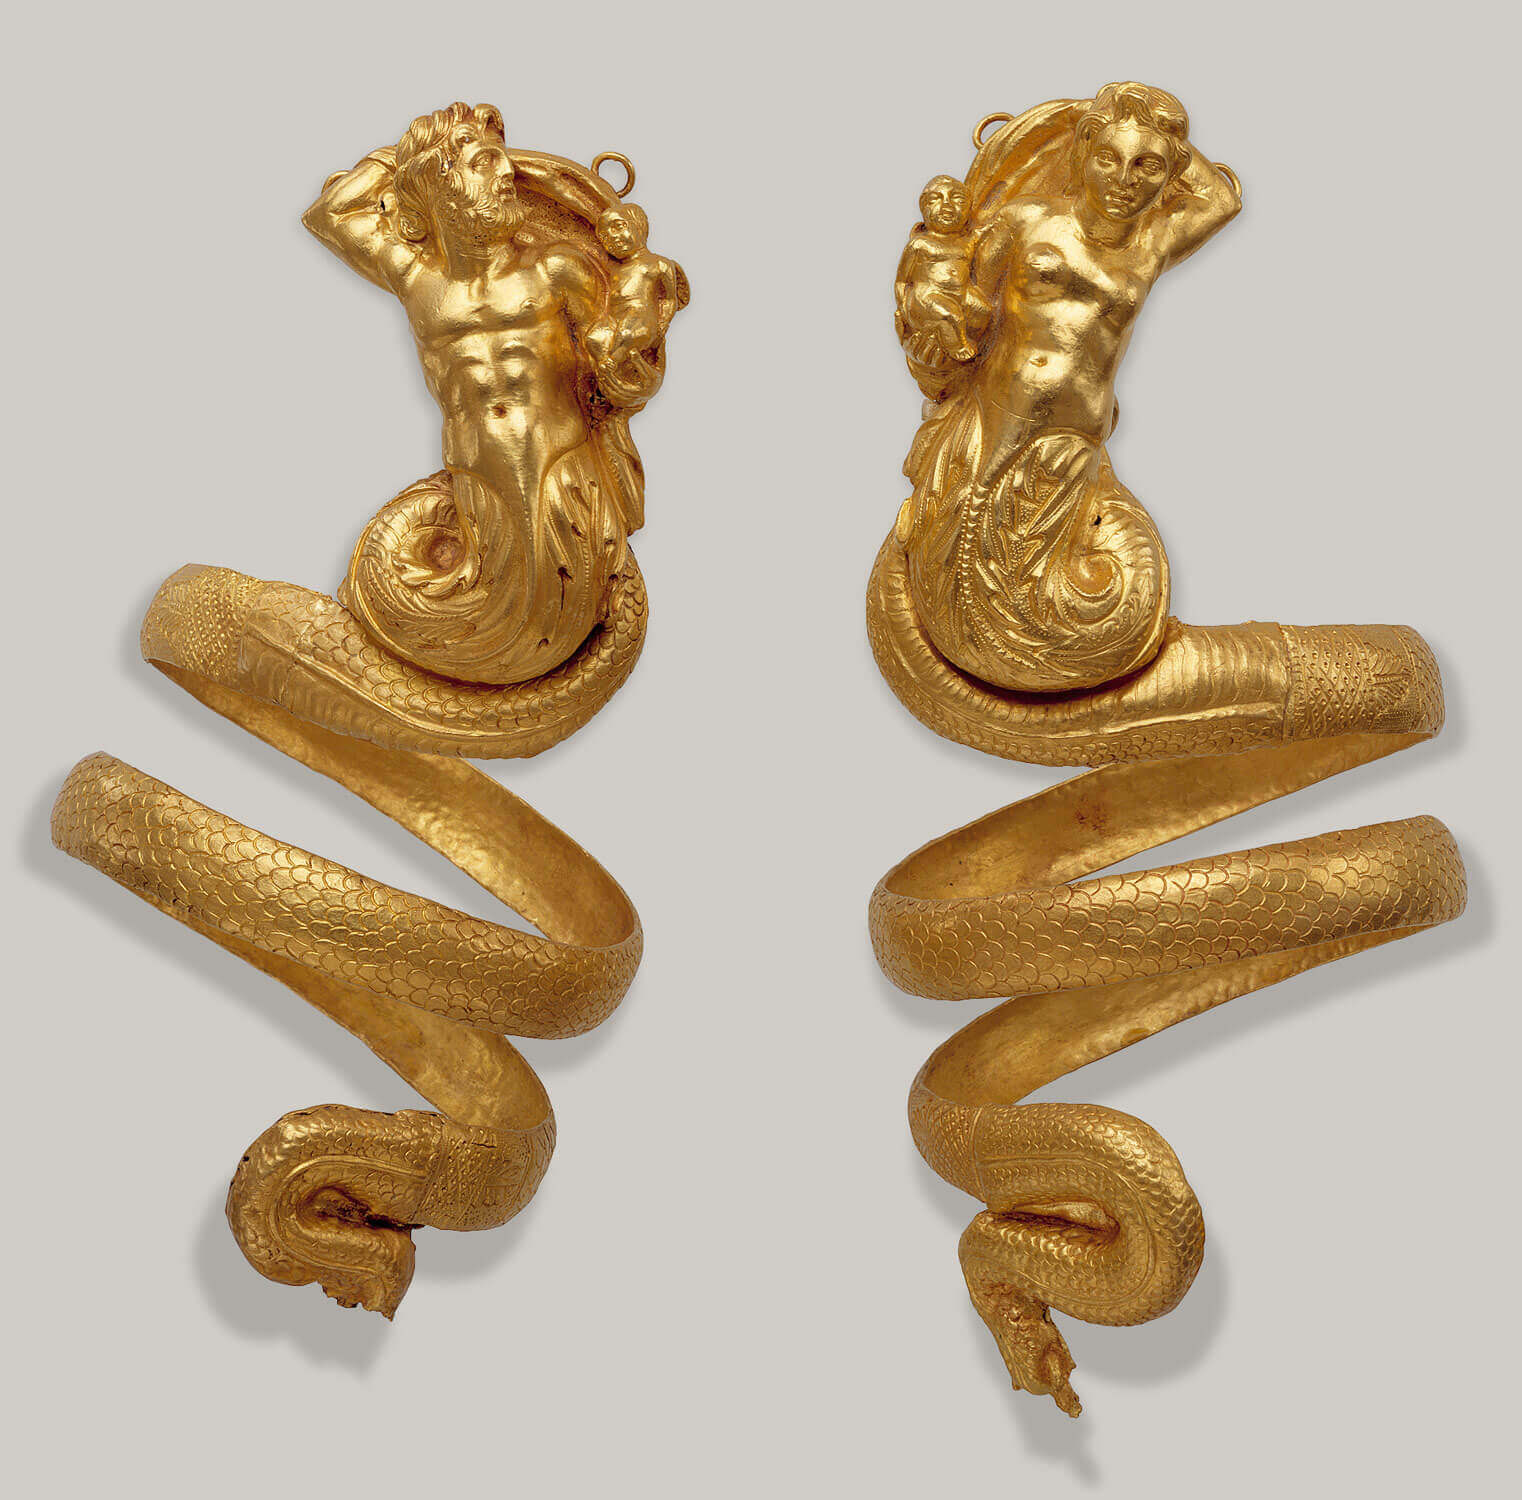 Pair of Hellenistic serpentine armbands, 200 BCE.